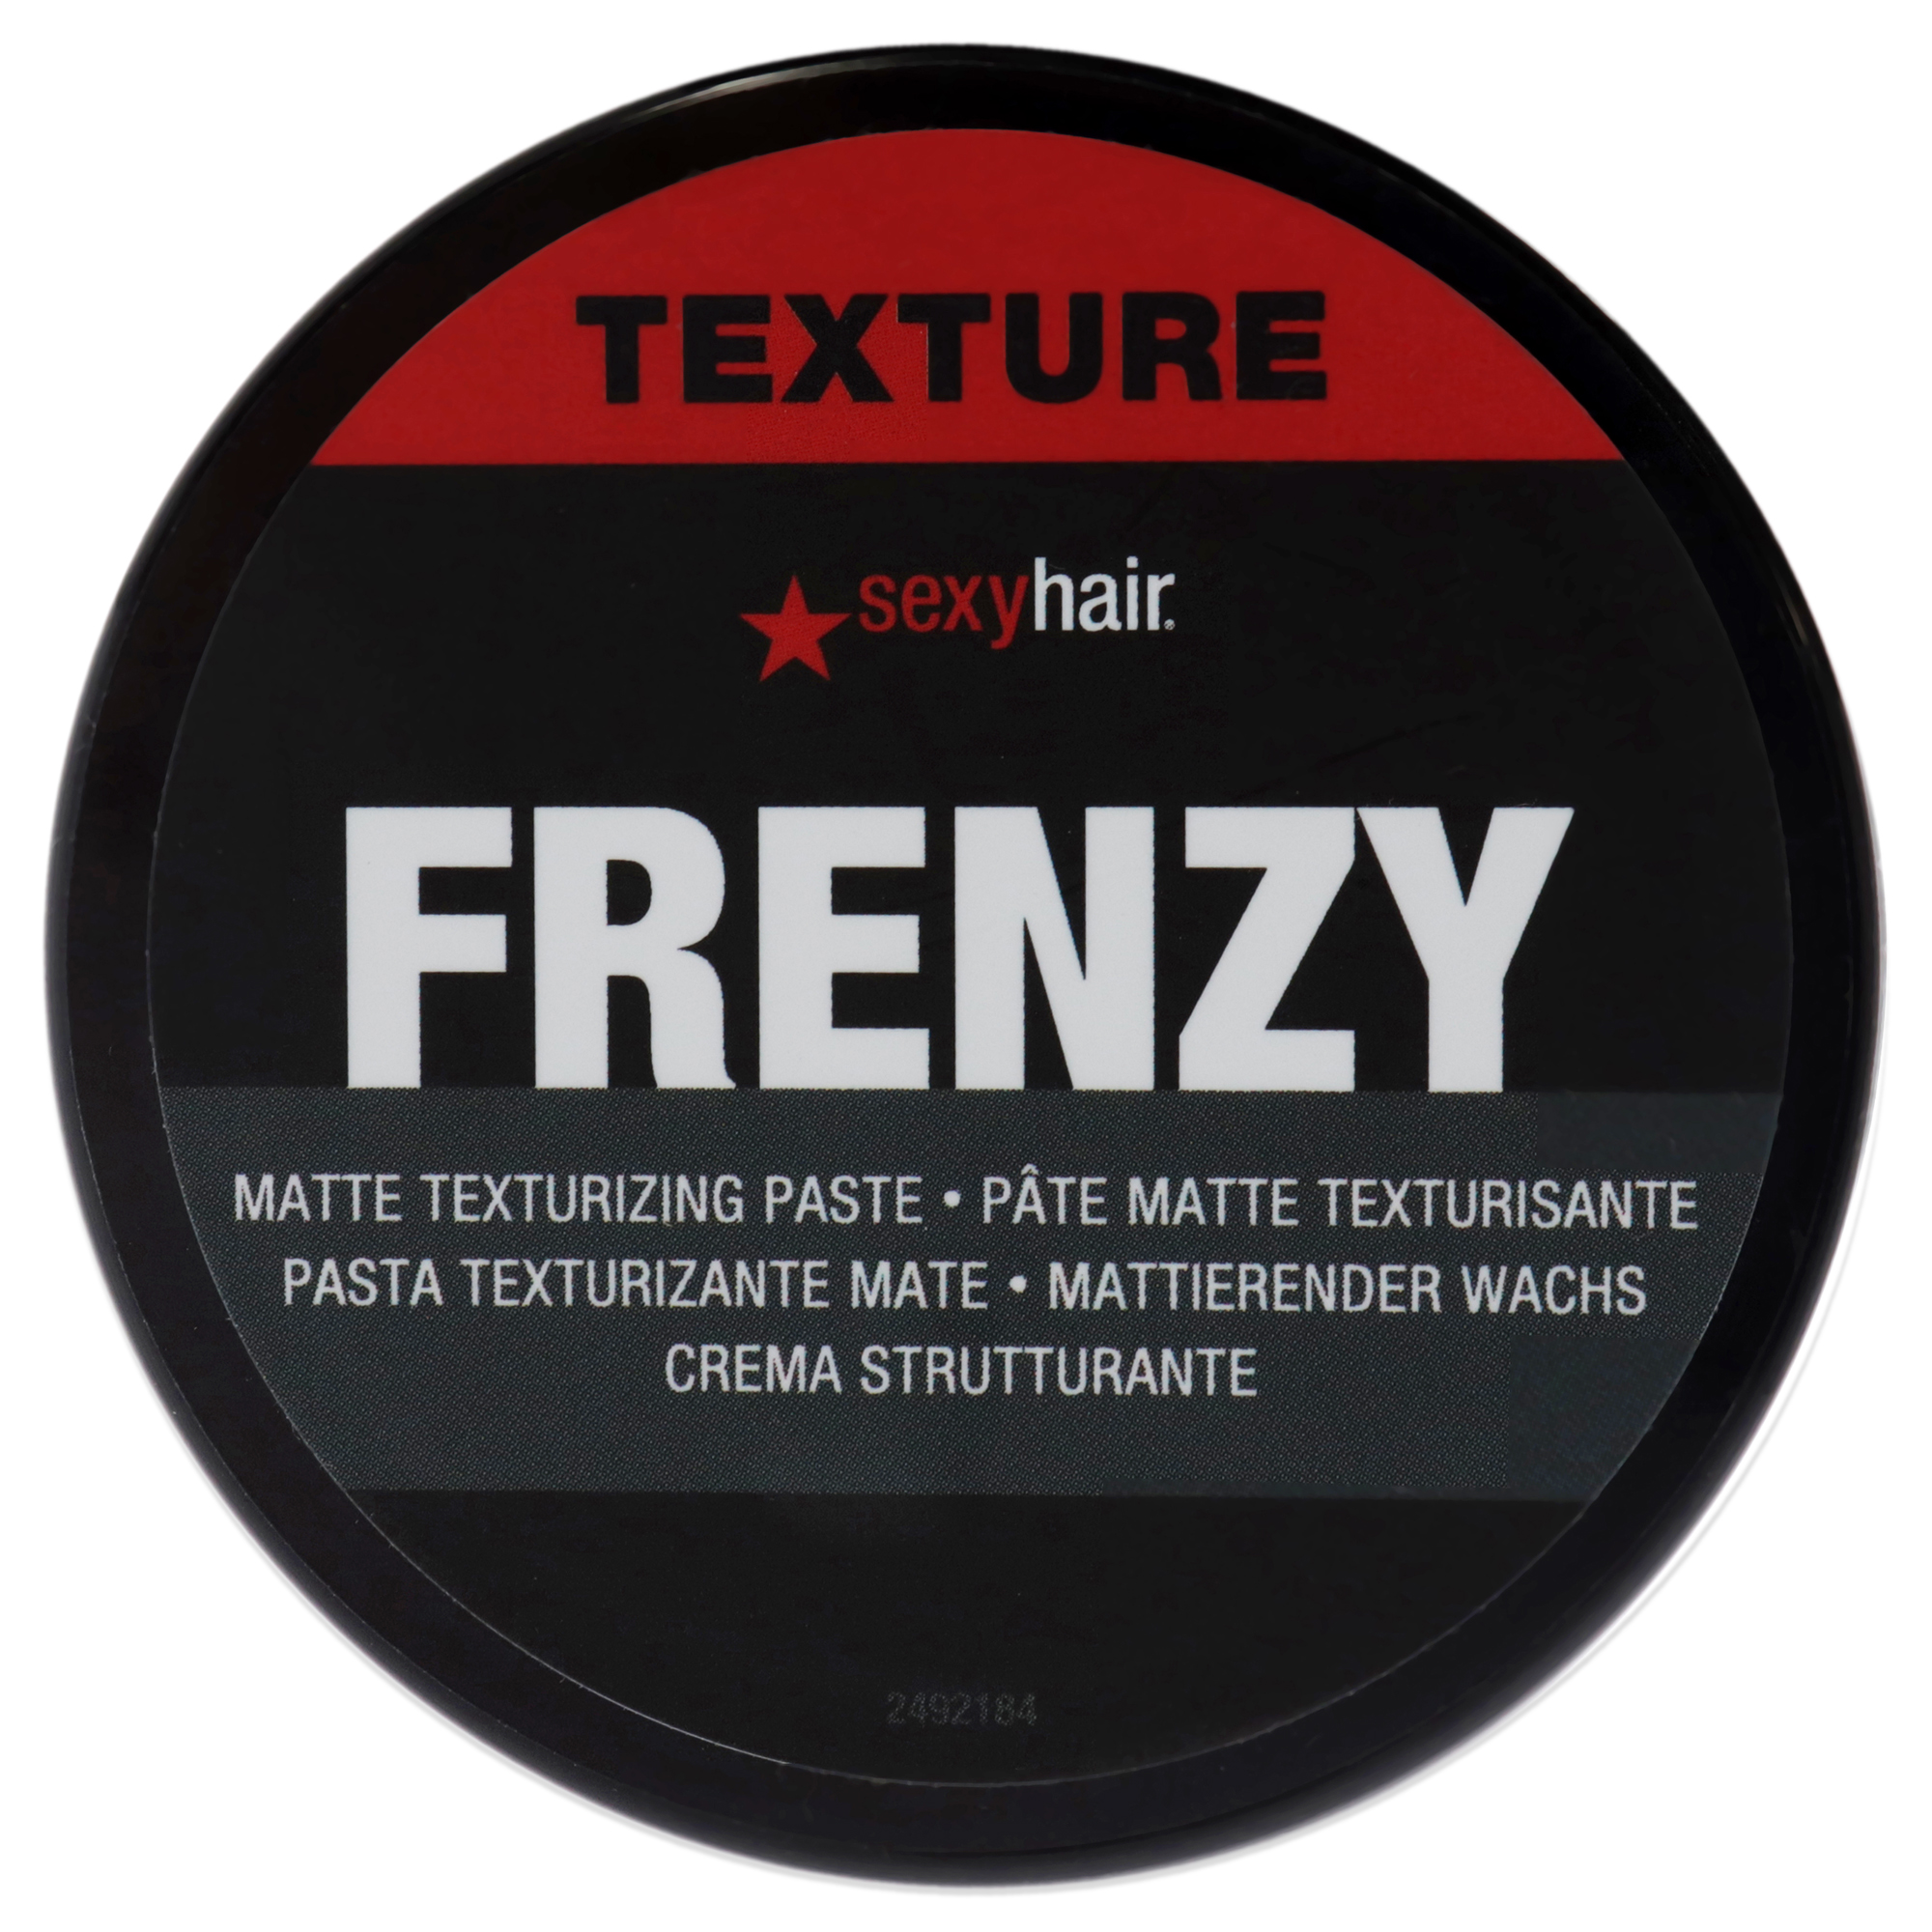 Style Sexy Hair Frenzy Matte Texturizing Paste, 2.5 oz - image 1 of 2